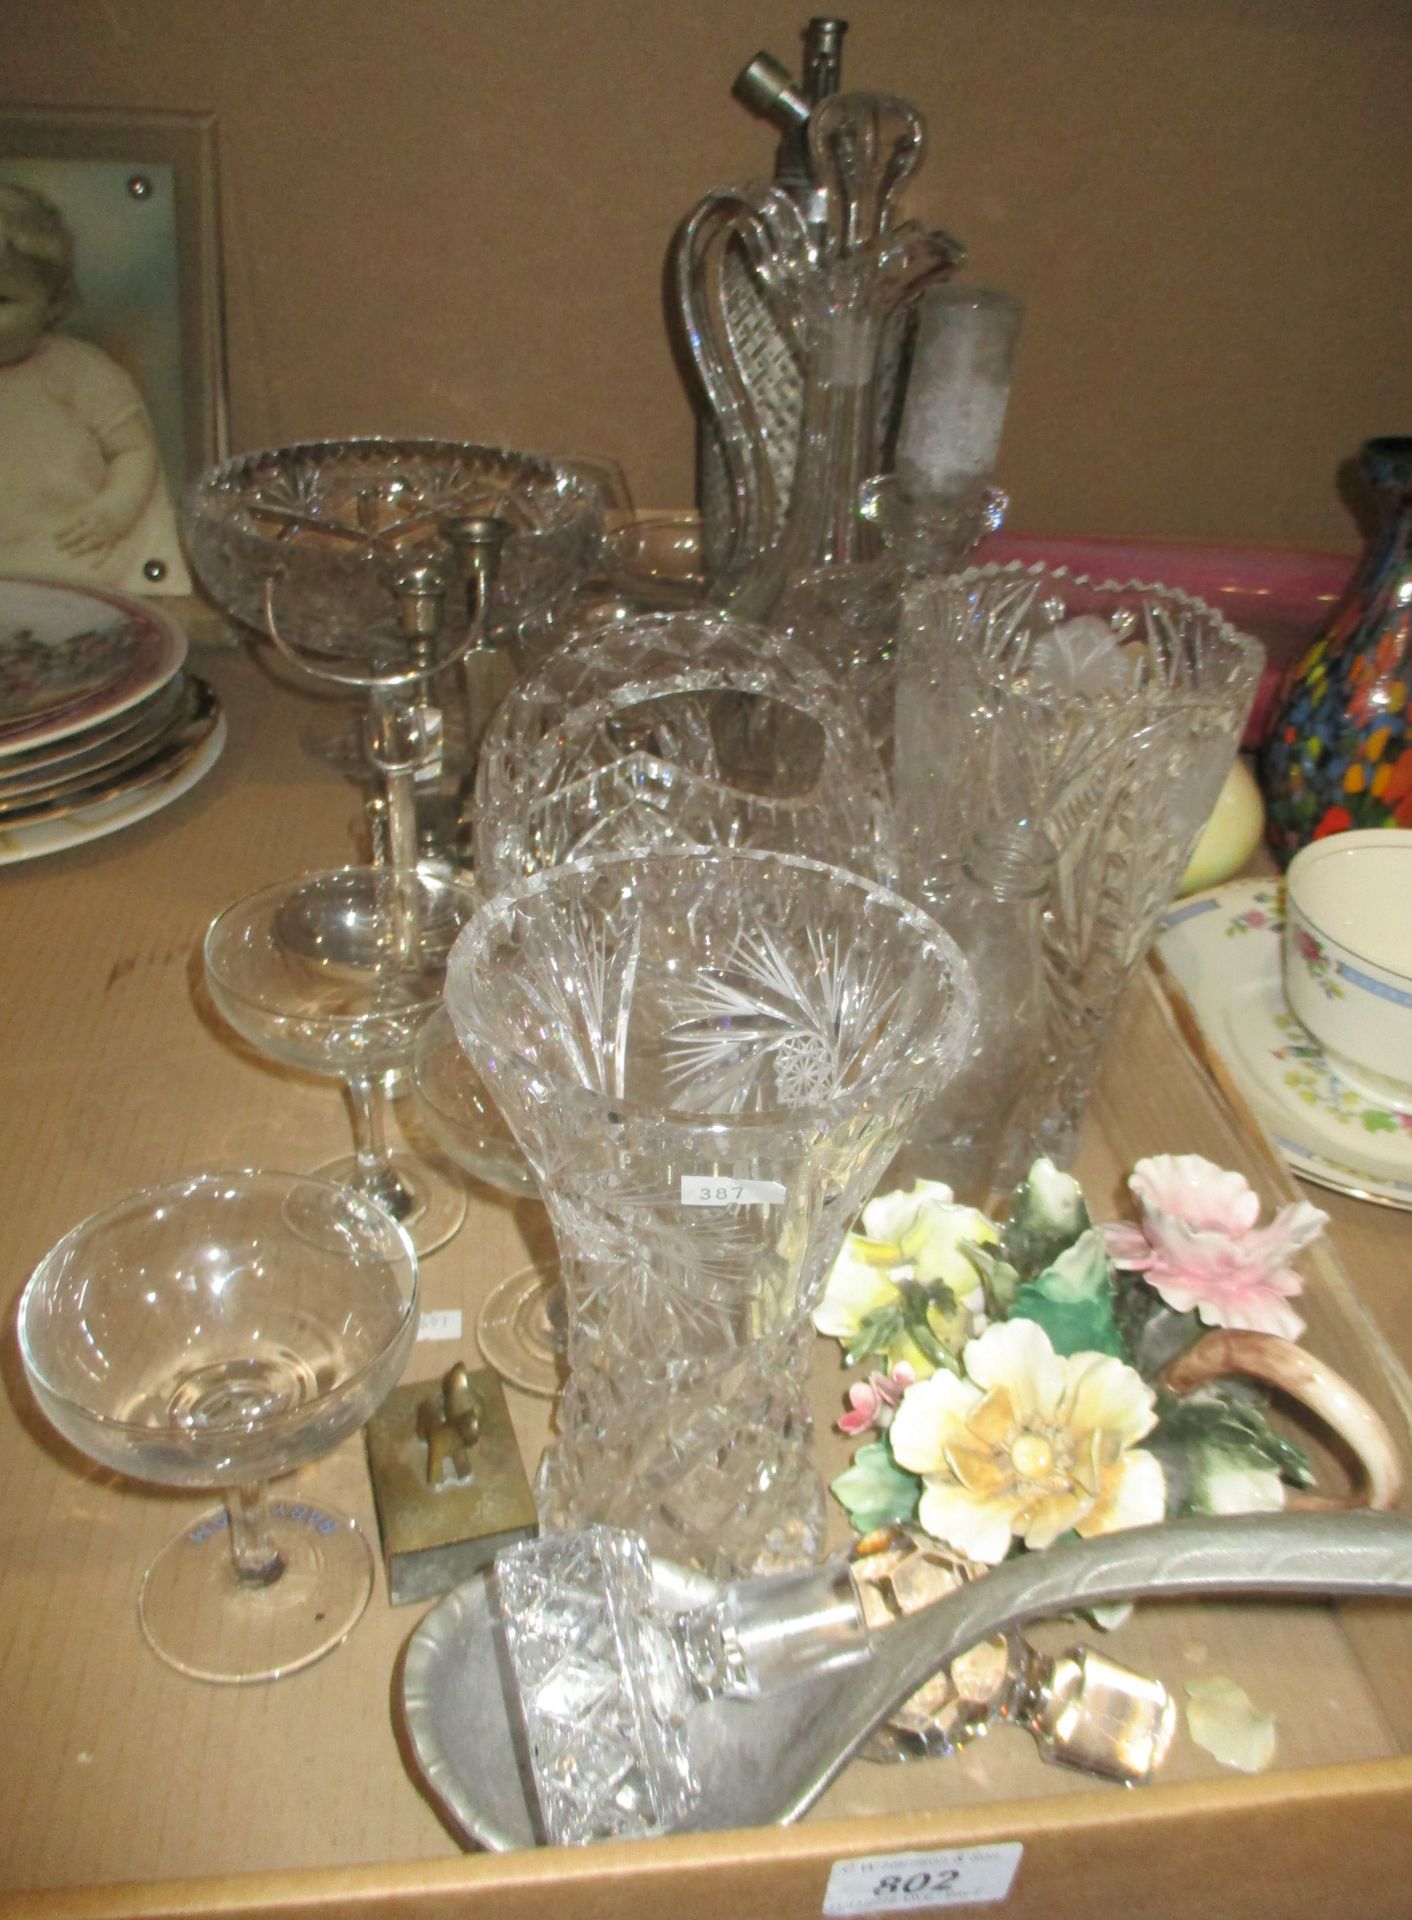 Contents to part of tray - assorted glassware and metalware etc